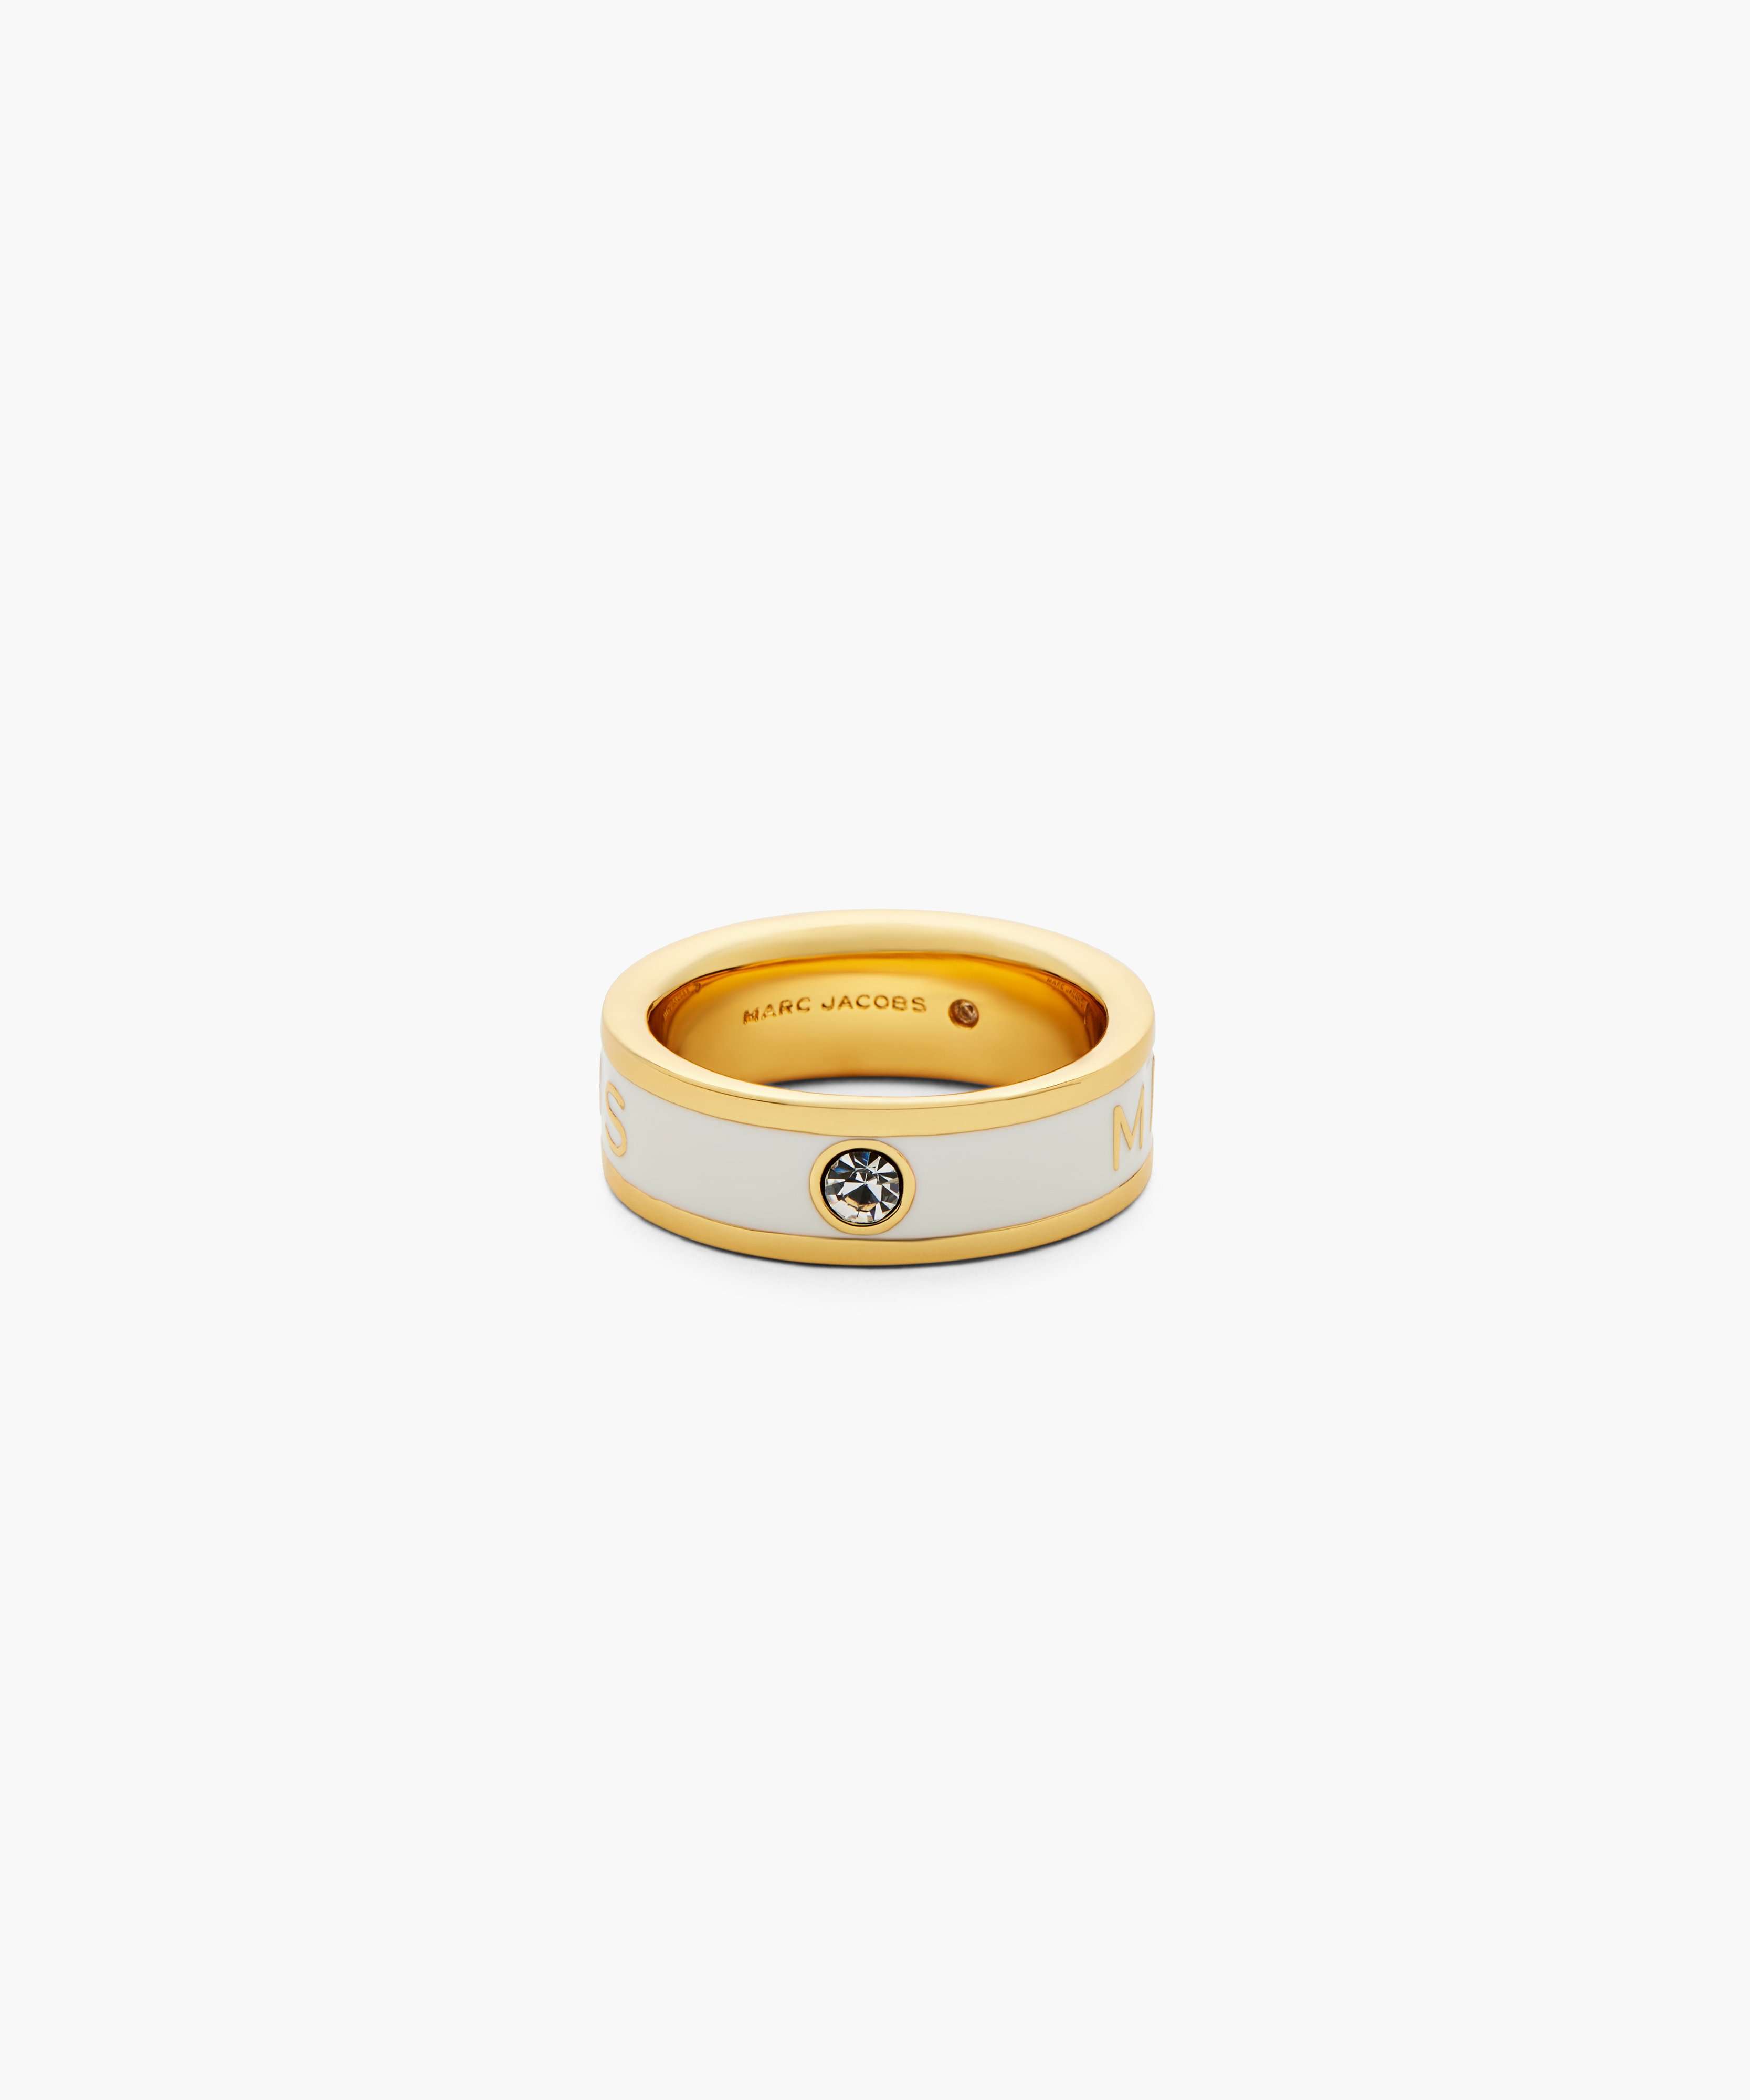 The Marc Jacobs Enamel Ring in Gold/Cream